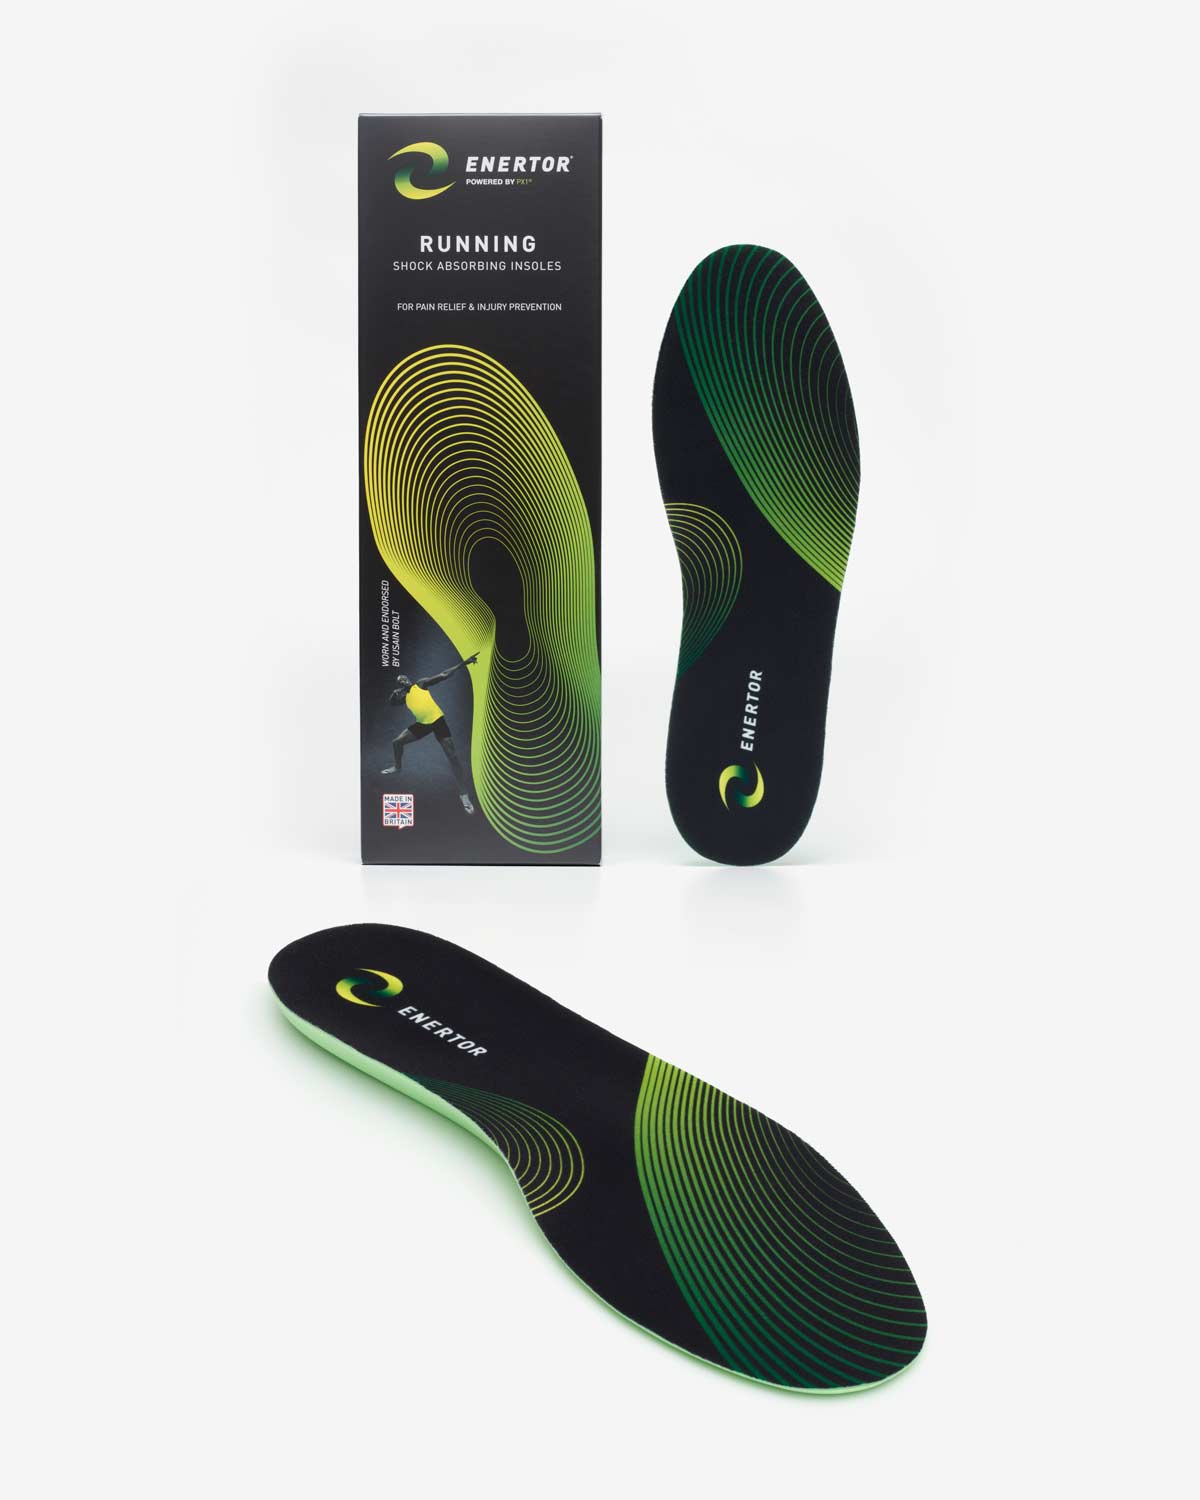 Enertor Running Black Insoles with Packaging